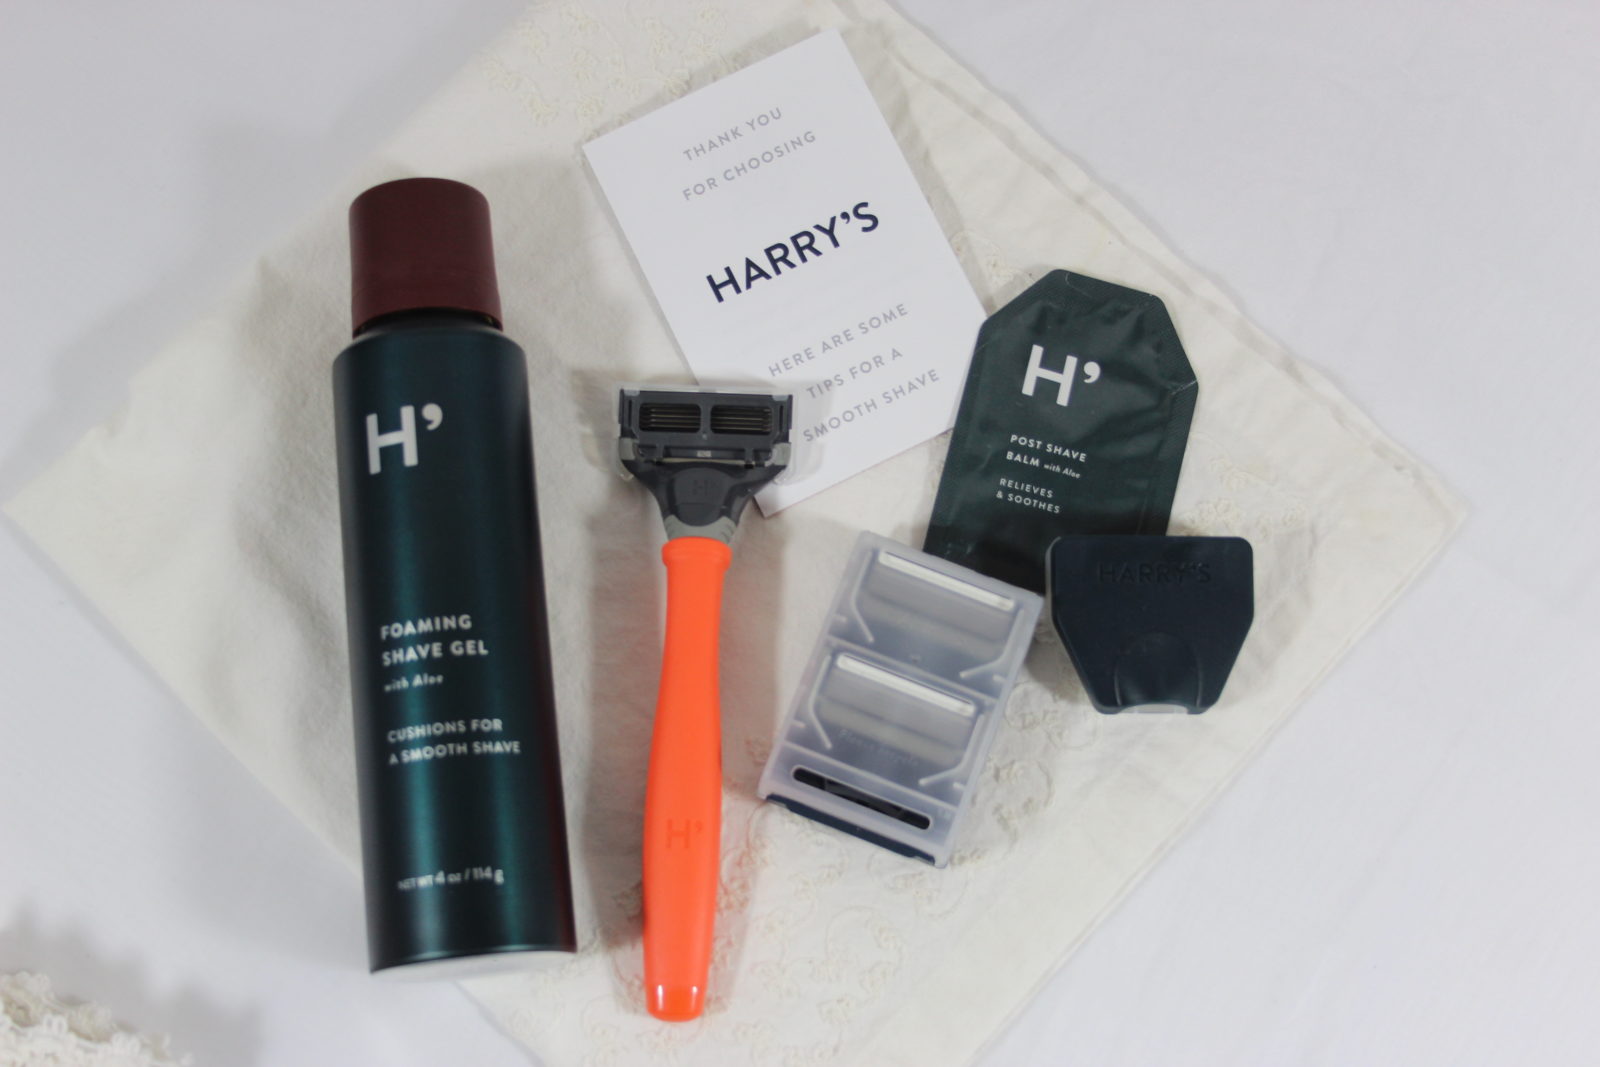 Harry's Shave Kit Review